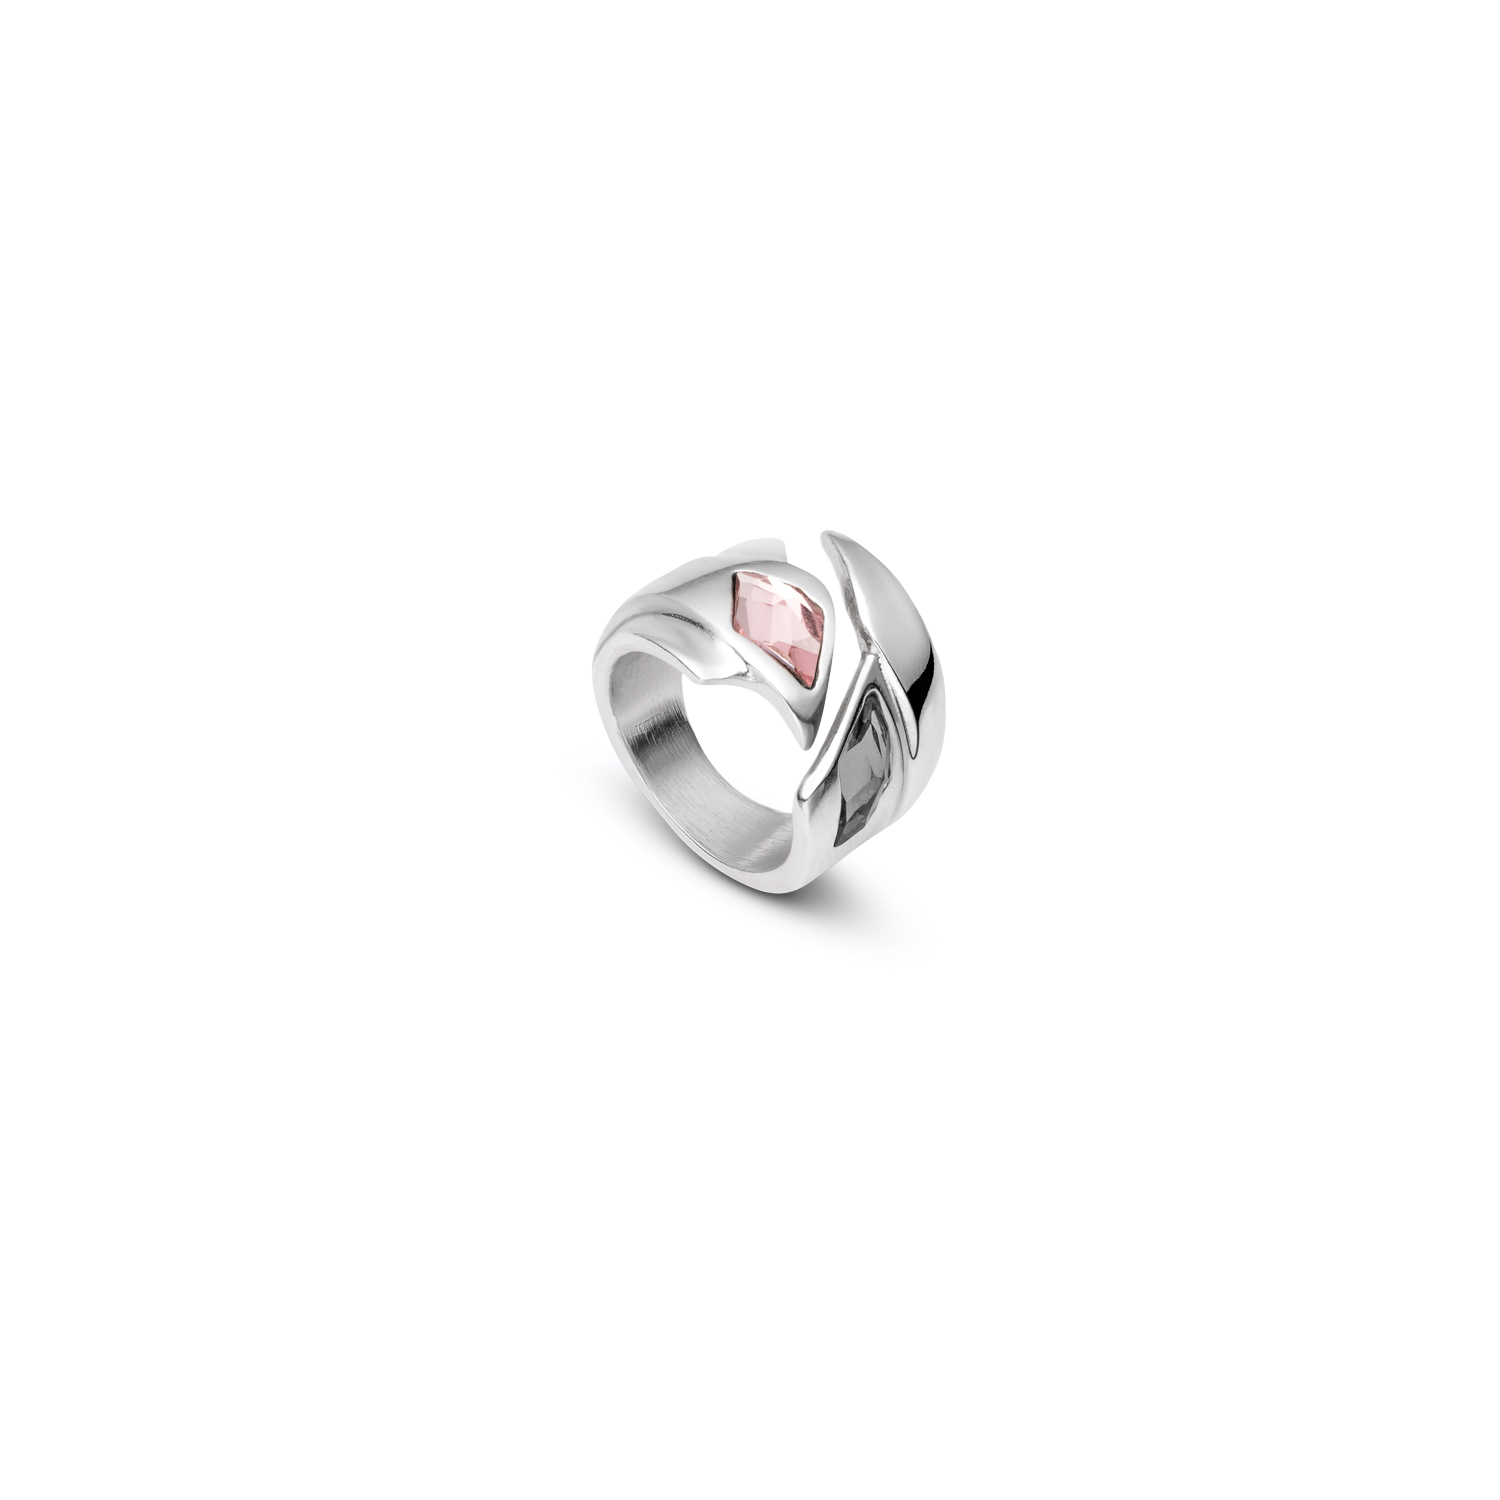 UNO DE 50 SILVER PLATED SUPERSTITION RING SIZE L